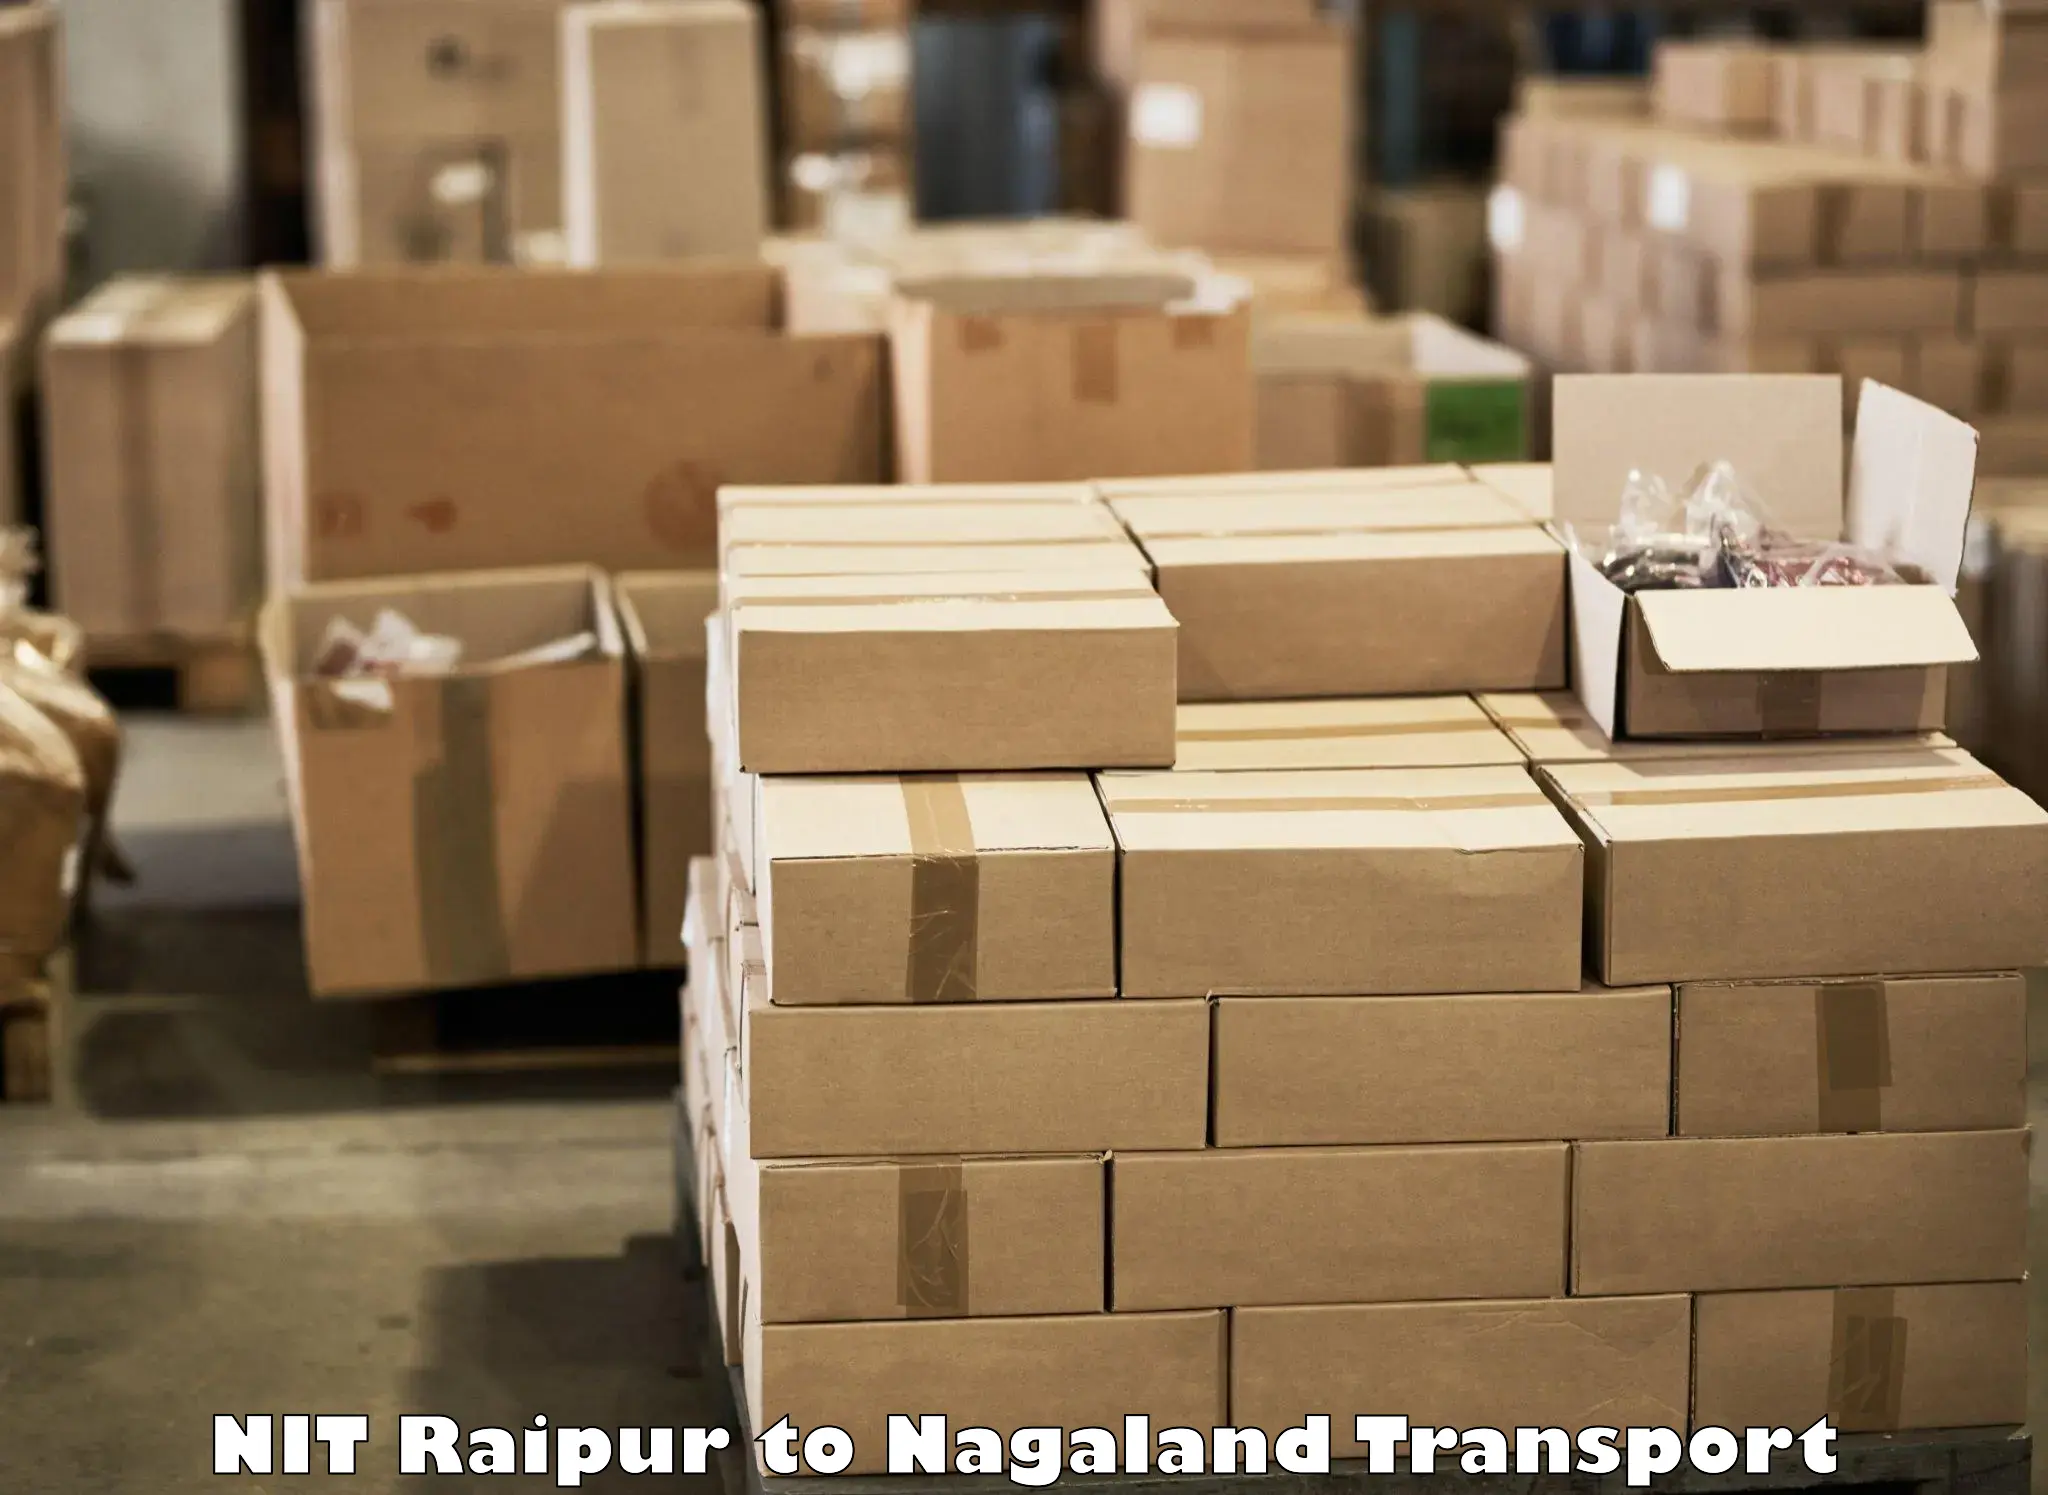 Container transport service NIT Raipur to Nagaland